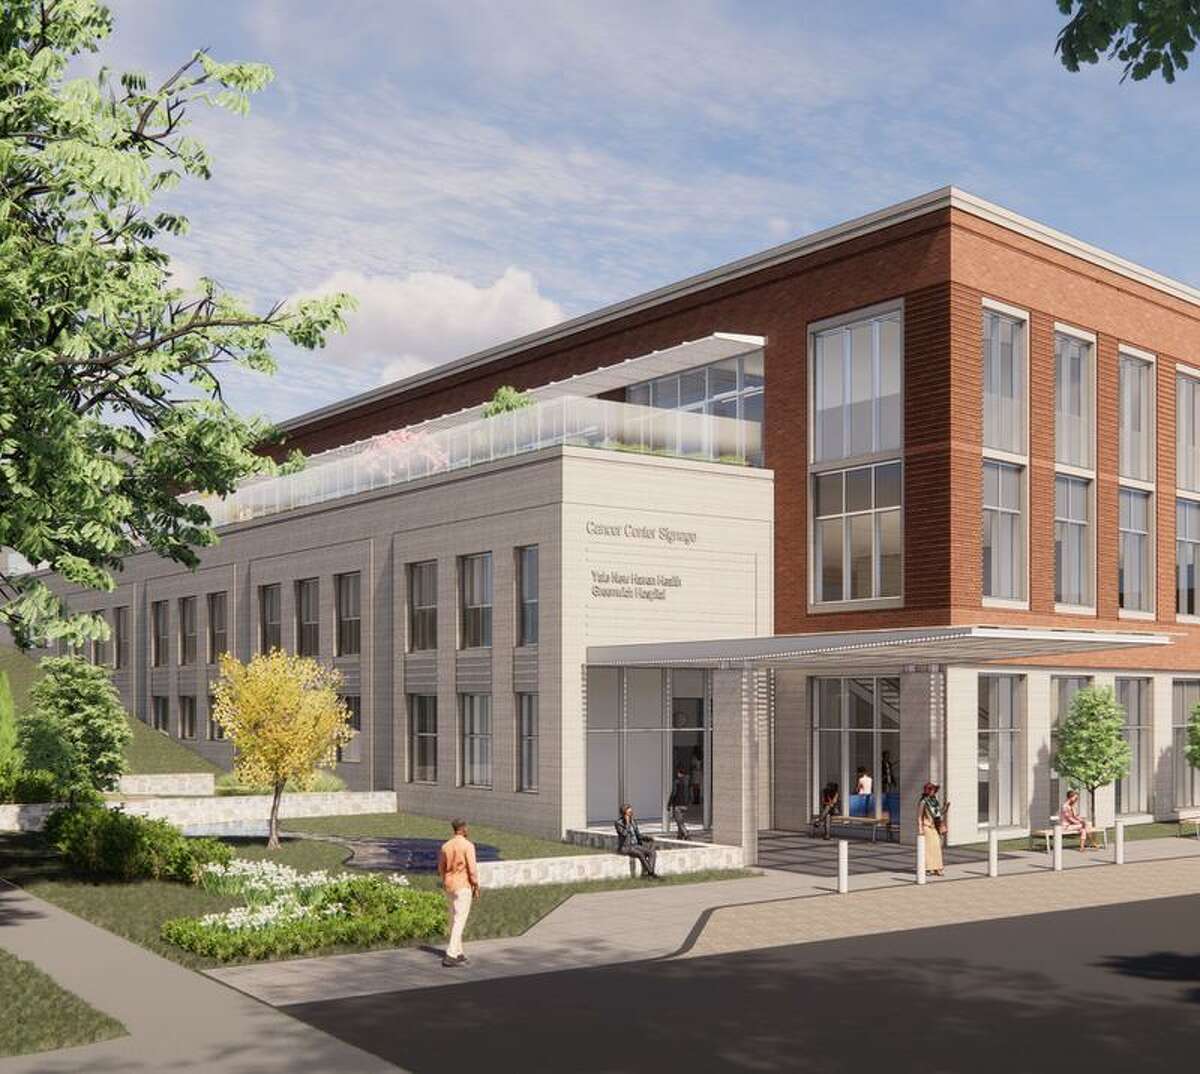 An artist’s rendering depicts the proposed Smilow Cancer Center.